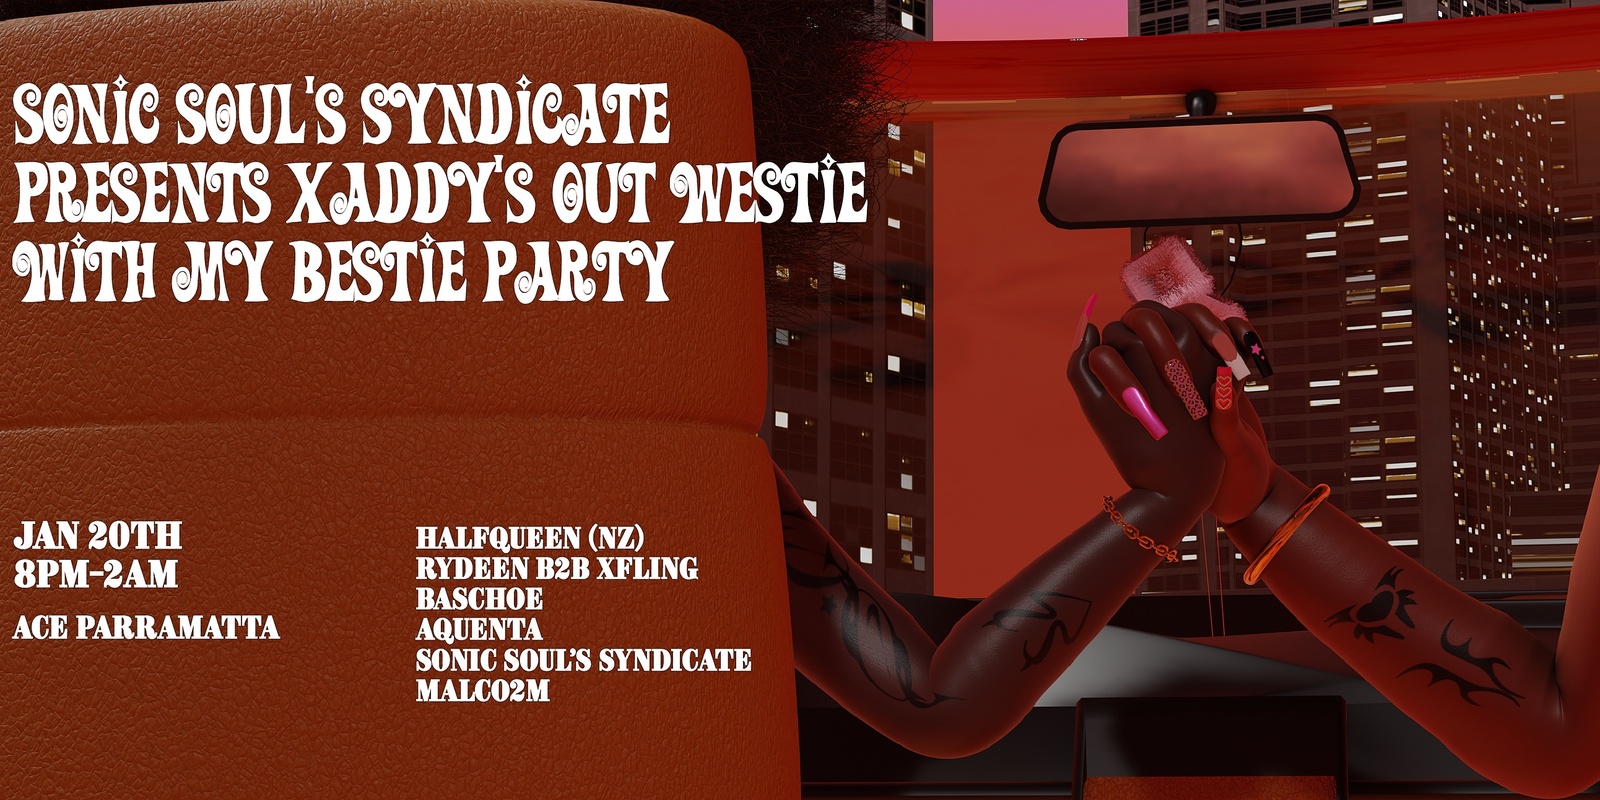 Banner image for Xaddy's Out Westie with my Bestie Party x Soul Sonic's Sydnicate